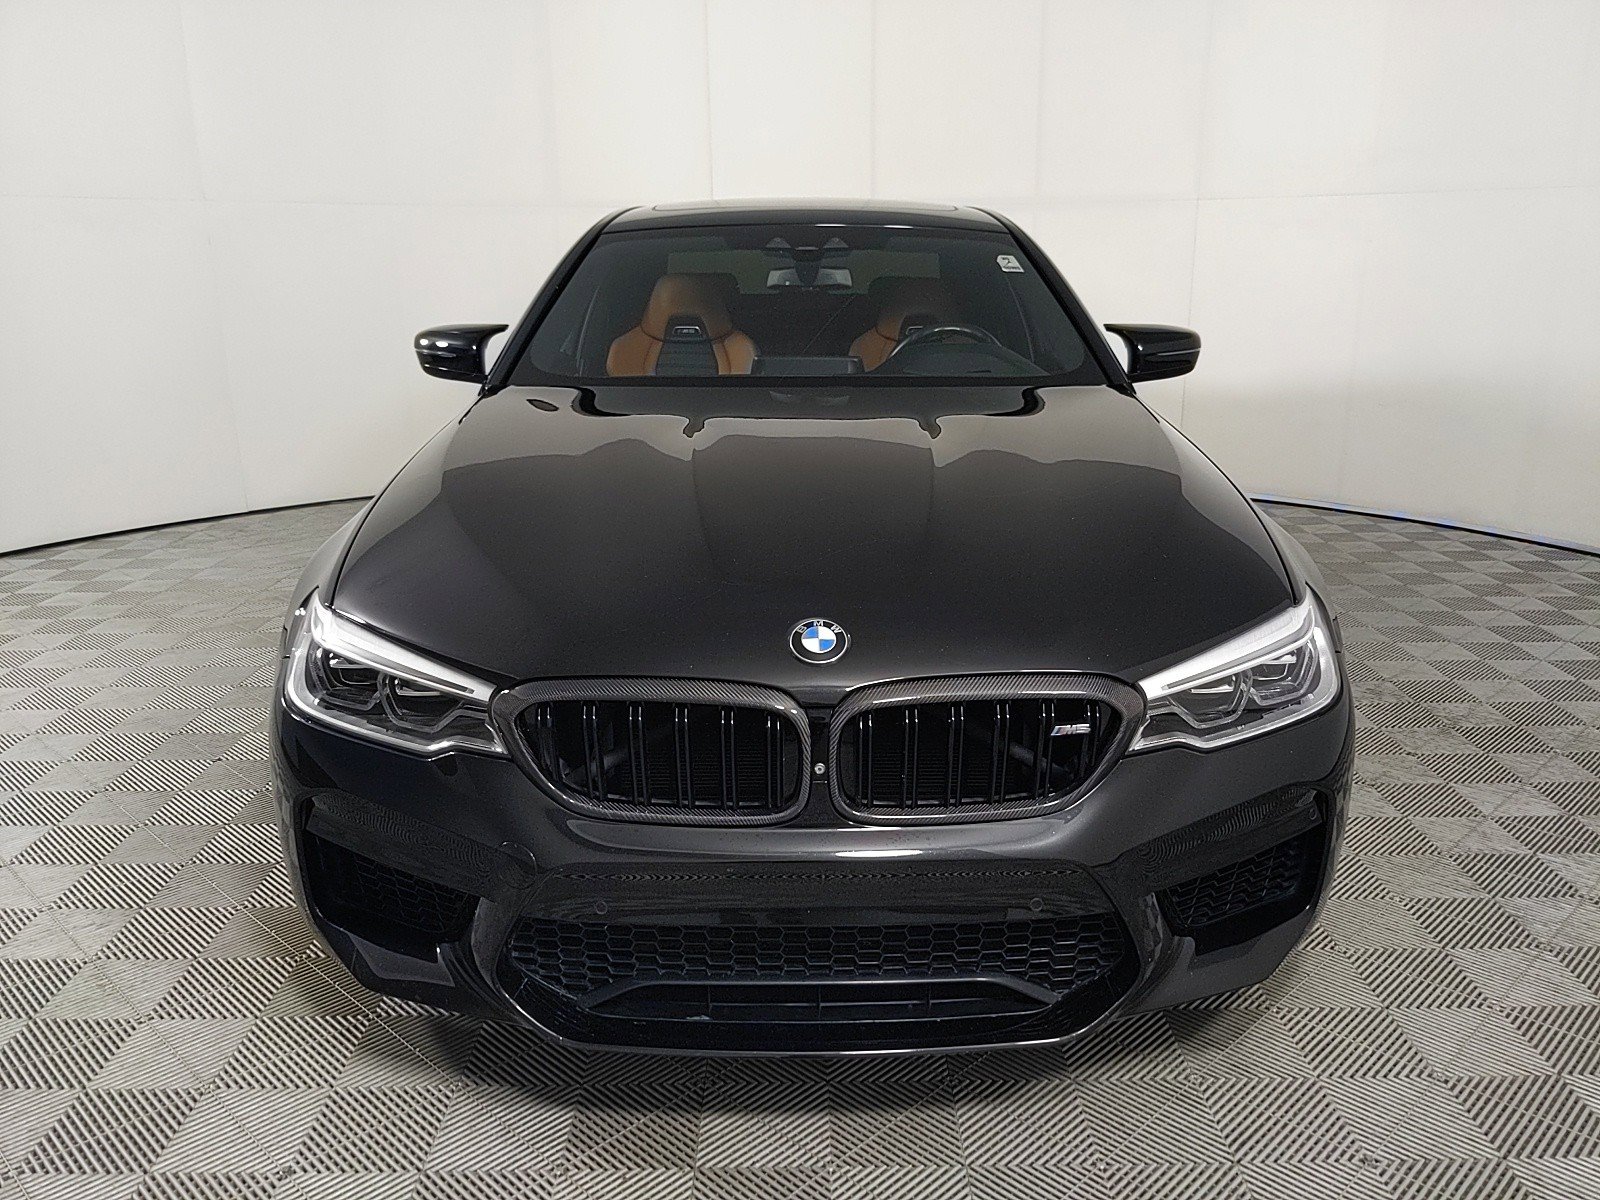 Used 2019 BMW M5 Base with VIN WBSJF0C53KB285156 for sale in Belmont, CA